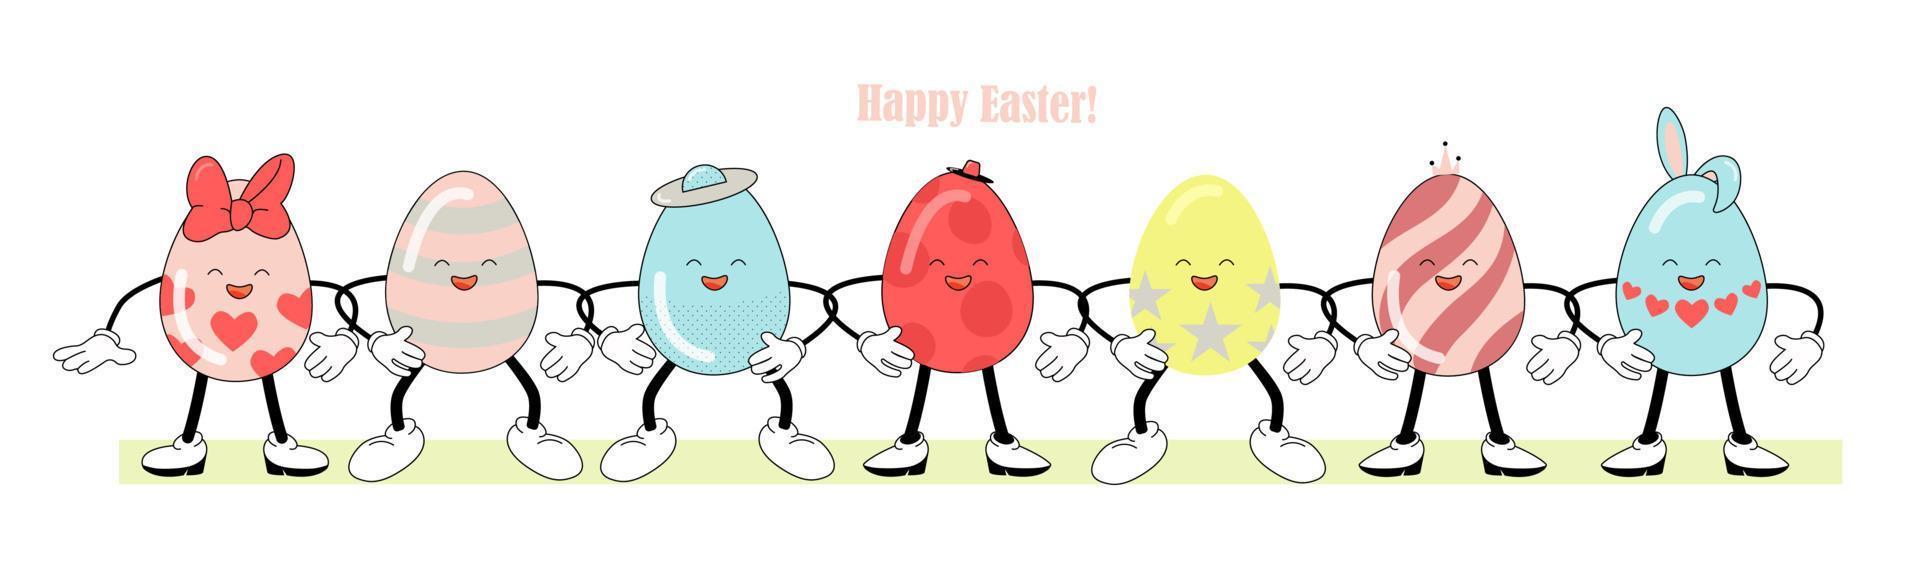 Painted Easter eggs - funny characters, retro atmosphere. Happy Easter lettering. Bright vector illustration